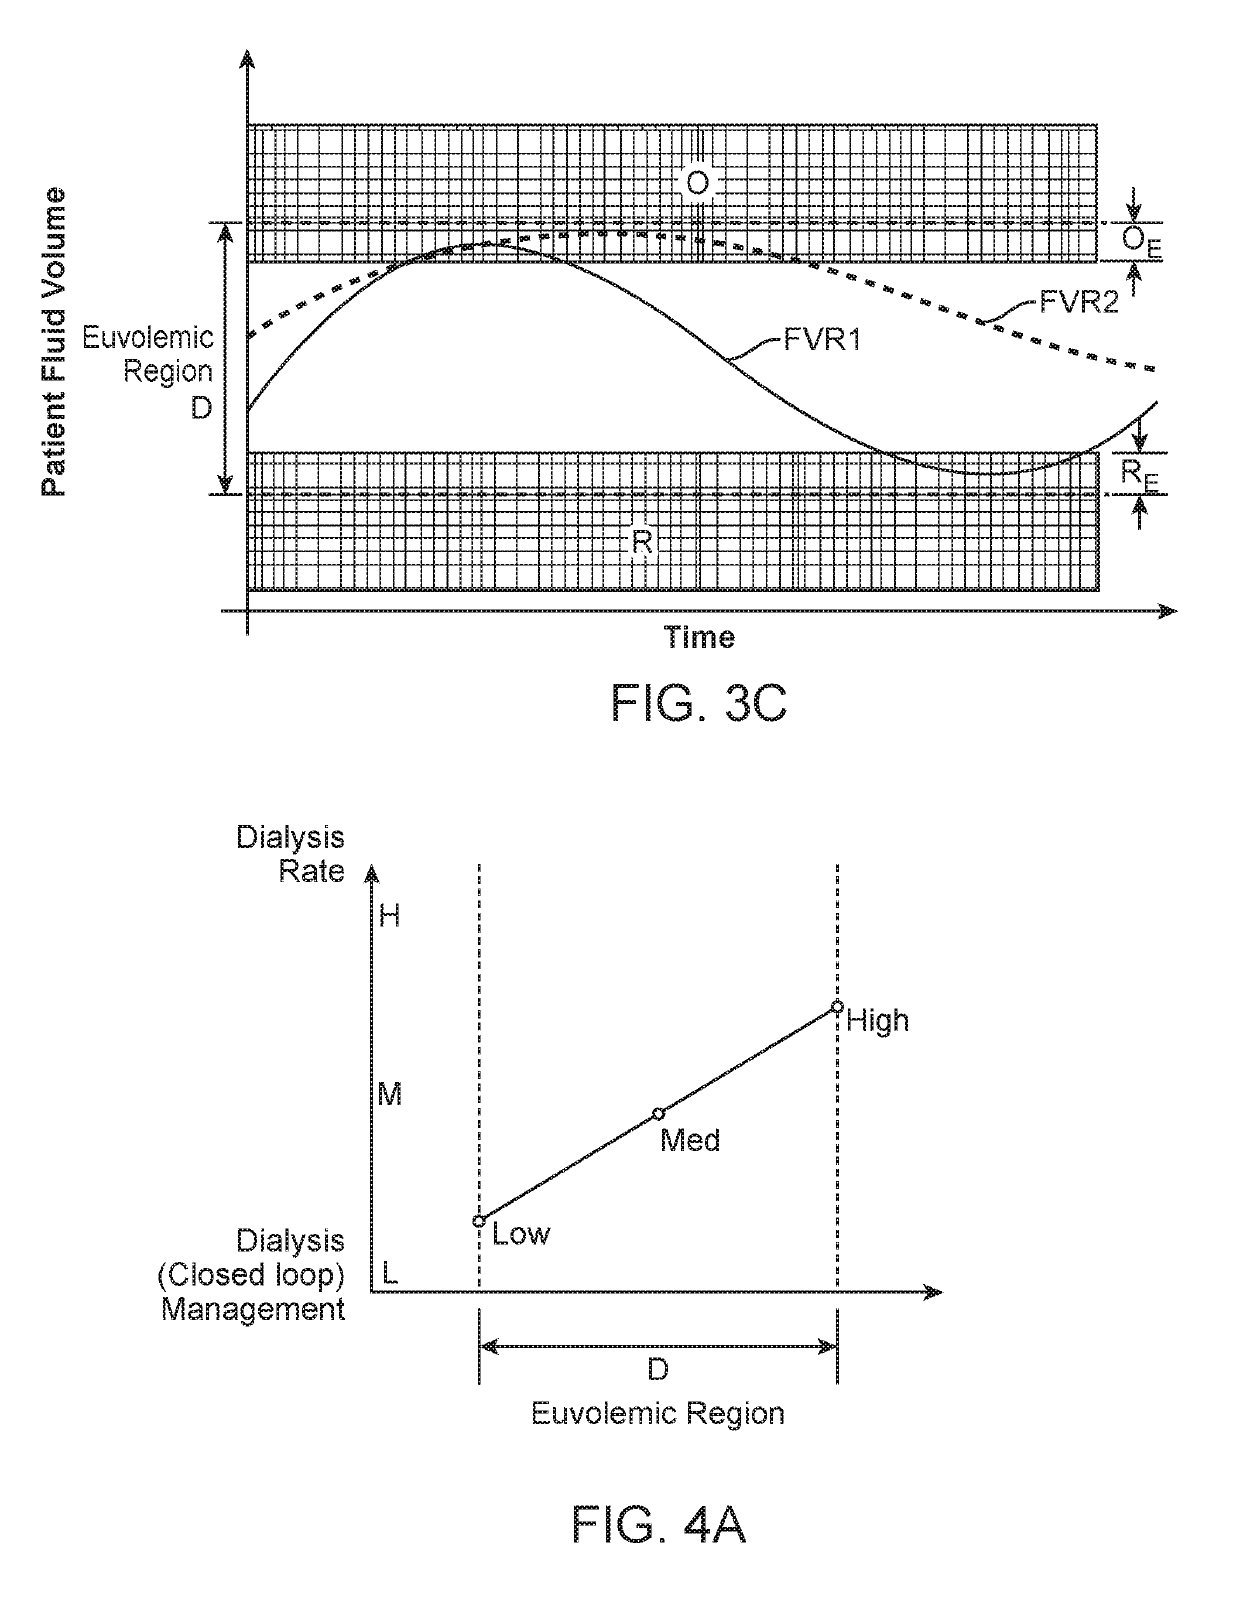 Systems and Methods for Patient Fluid Management